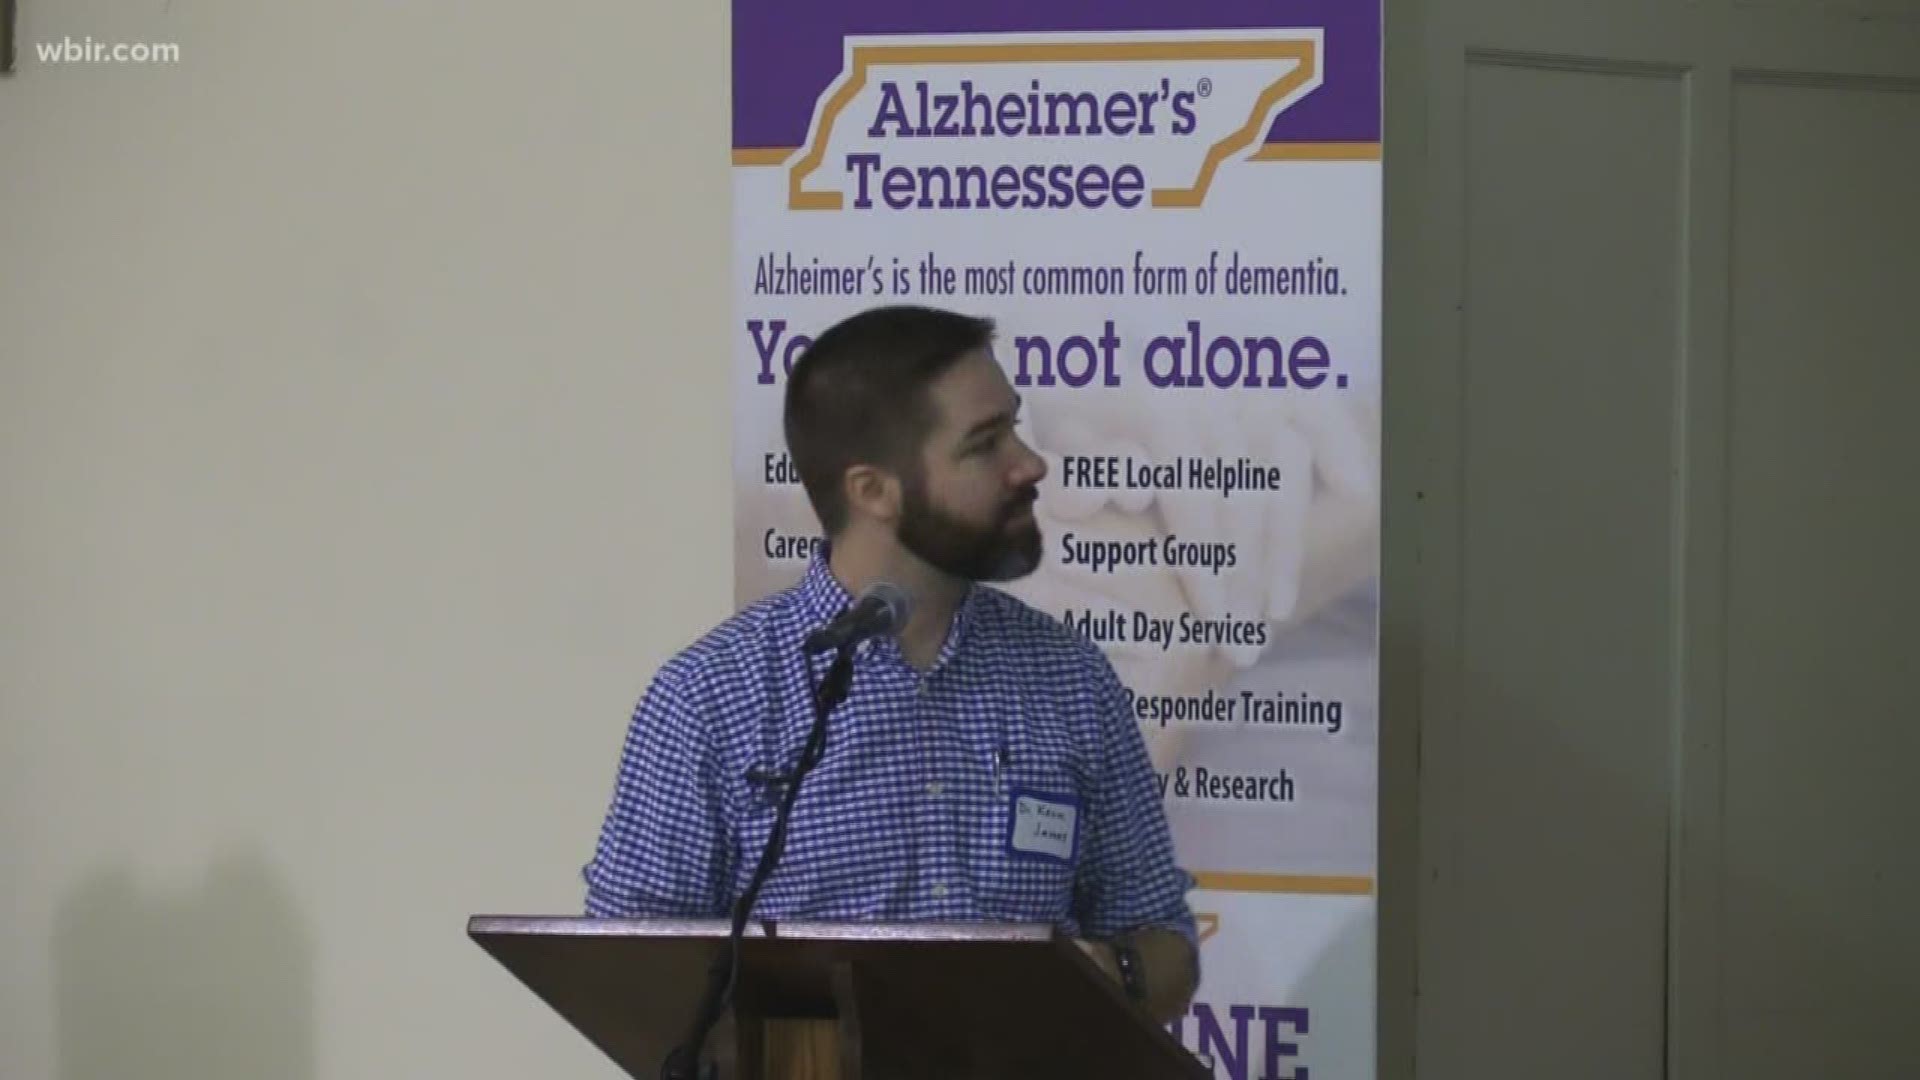 Alzheimer's Tennessee offers support services for patients and their caregivers